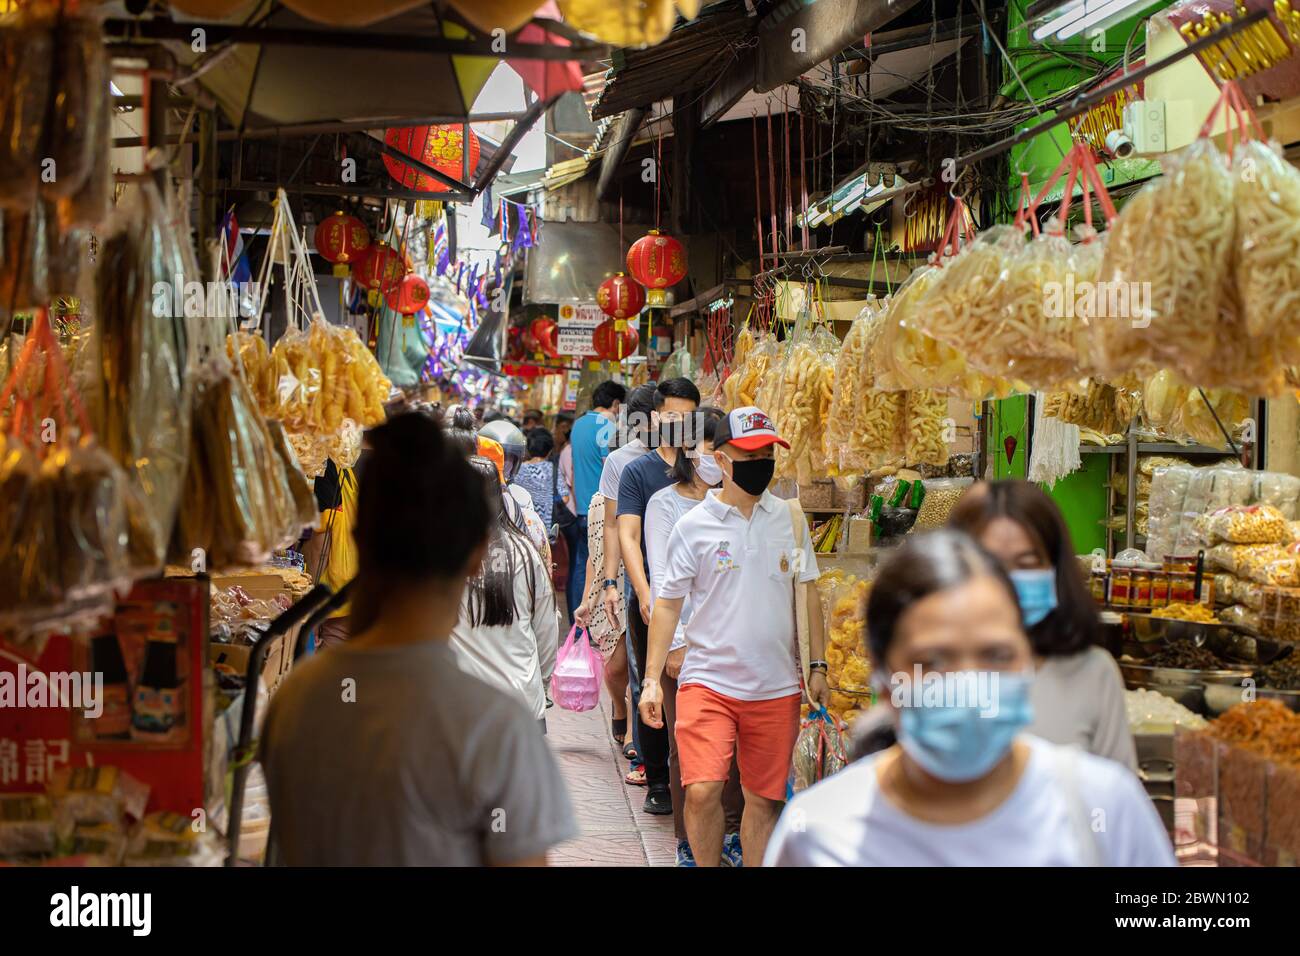 Crowd of people walking shopping for Chinese food resource in Chinatown Yaowarach market and waring face mask for protect Coronavirus(Covid-19). 30 Ma Stock Photo